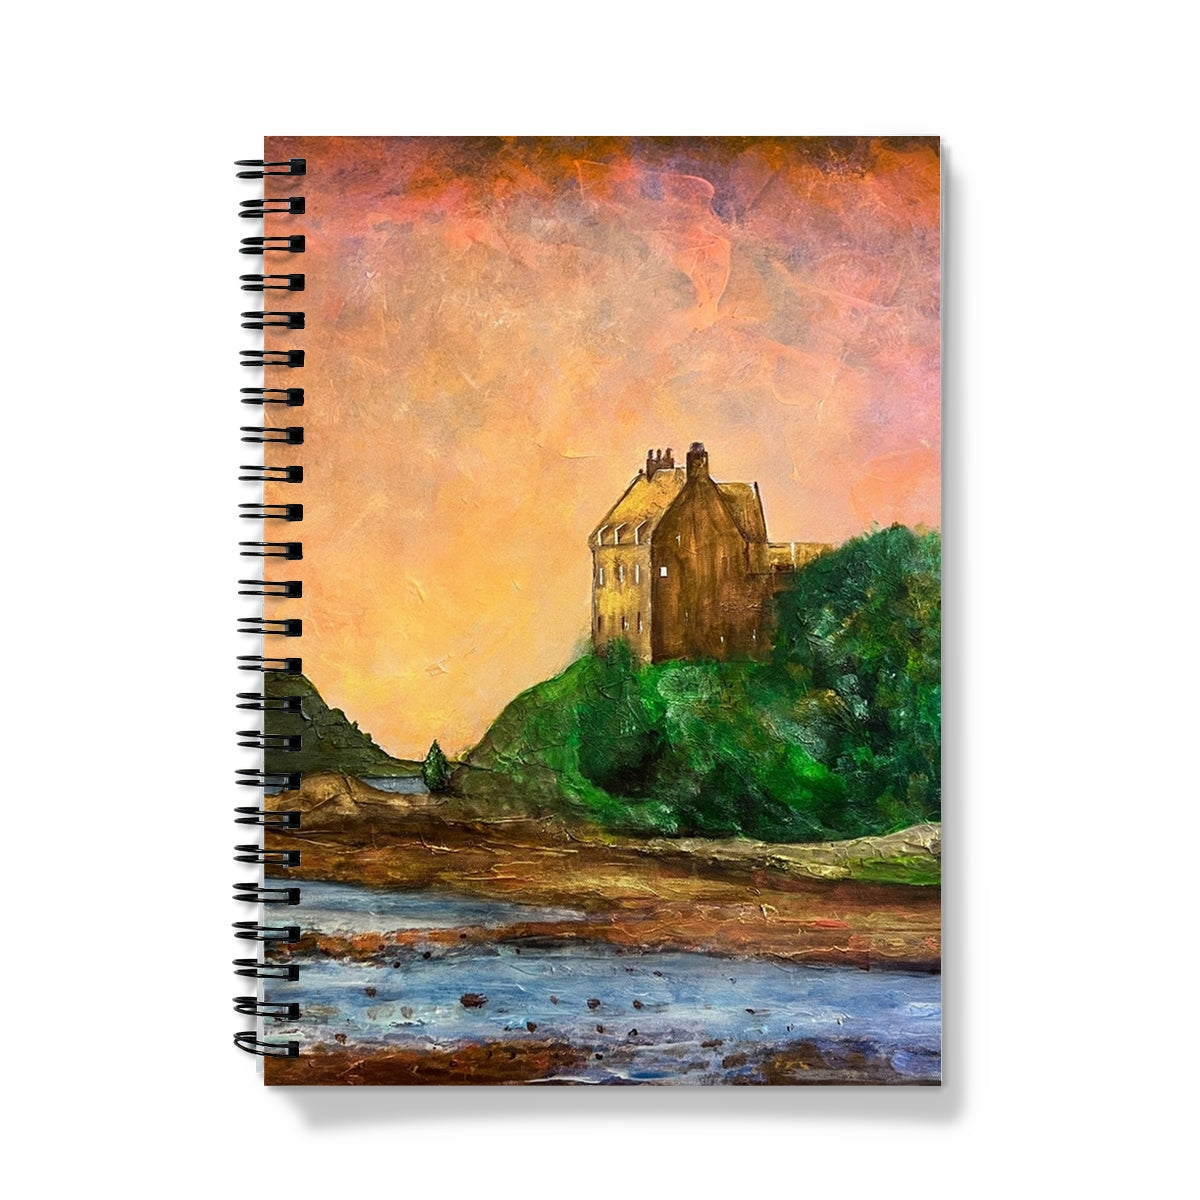 Duntrune Castle Art Gifts Notebook-Journals & Notebooks-Historic & Iconic Scotland Art Gallery-A5-Graph-Paintings, Prints, Homeware, Art Gifts From Scotland By Scottish Artist Kevin Hunter